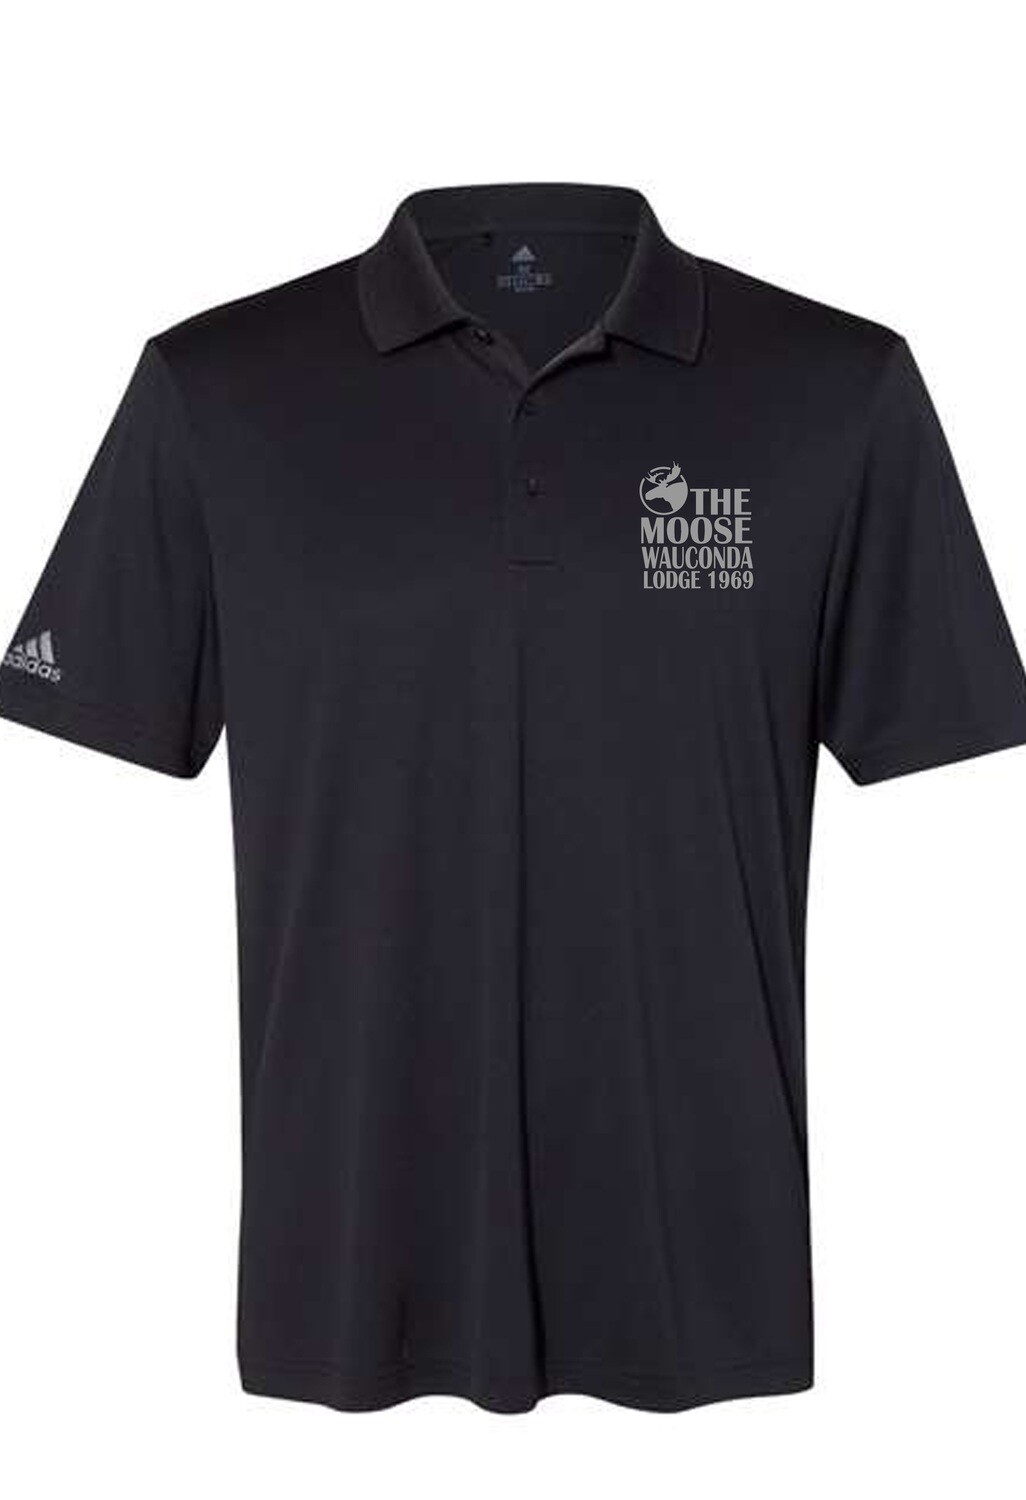 The Moose Performance Polo